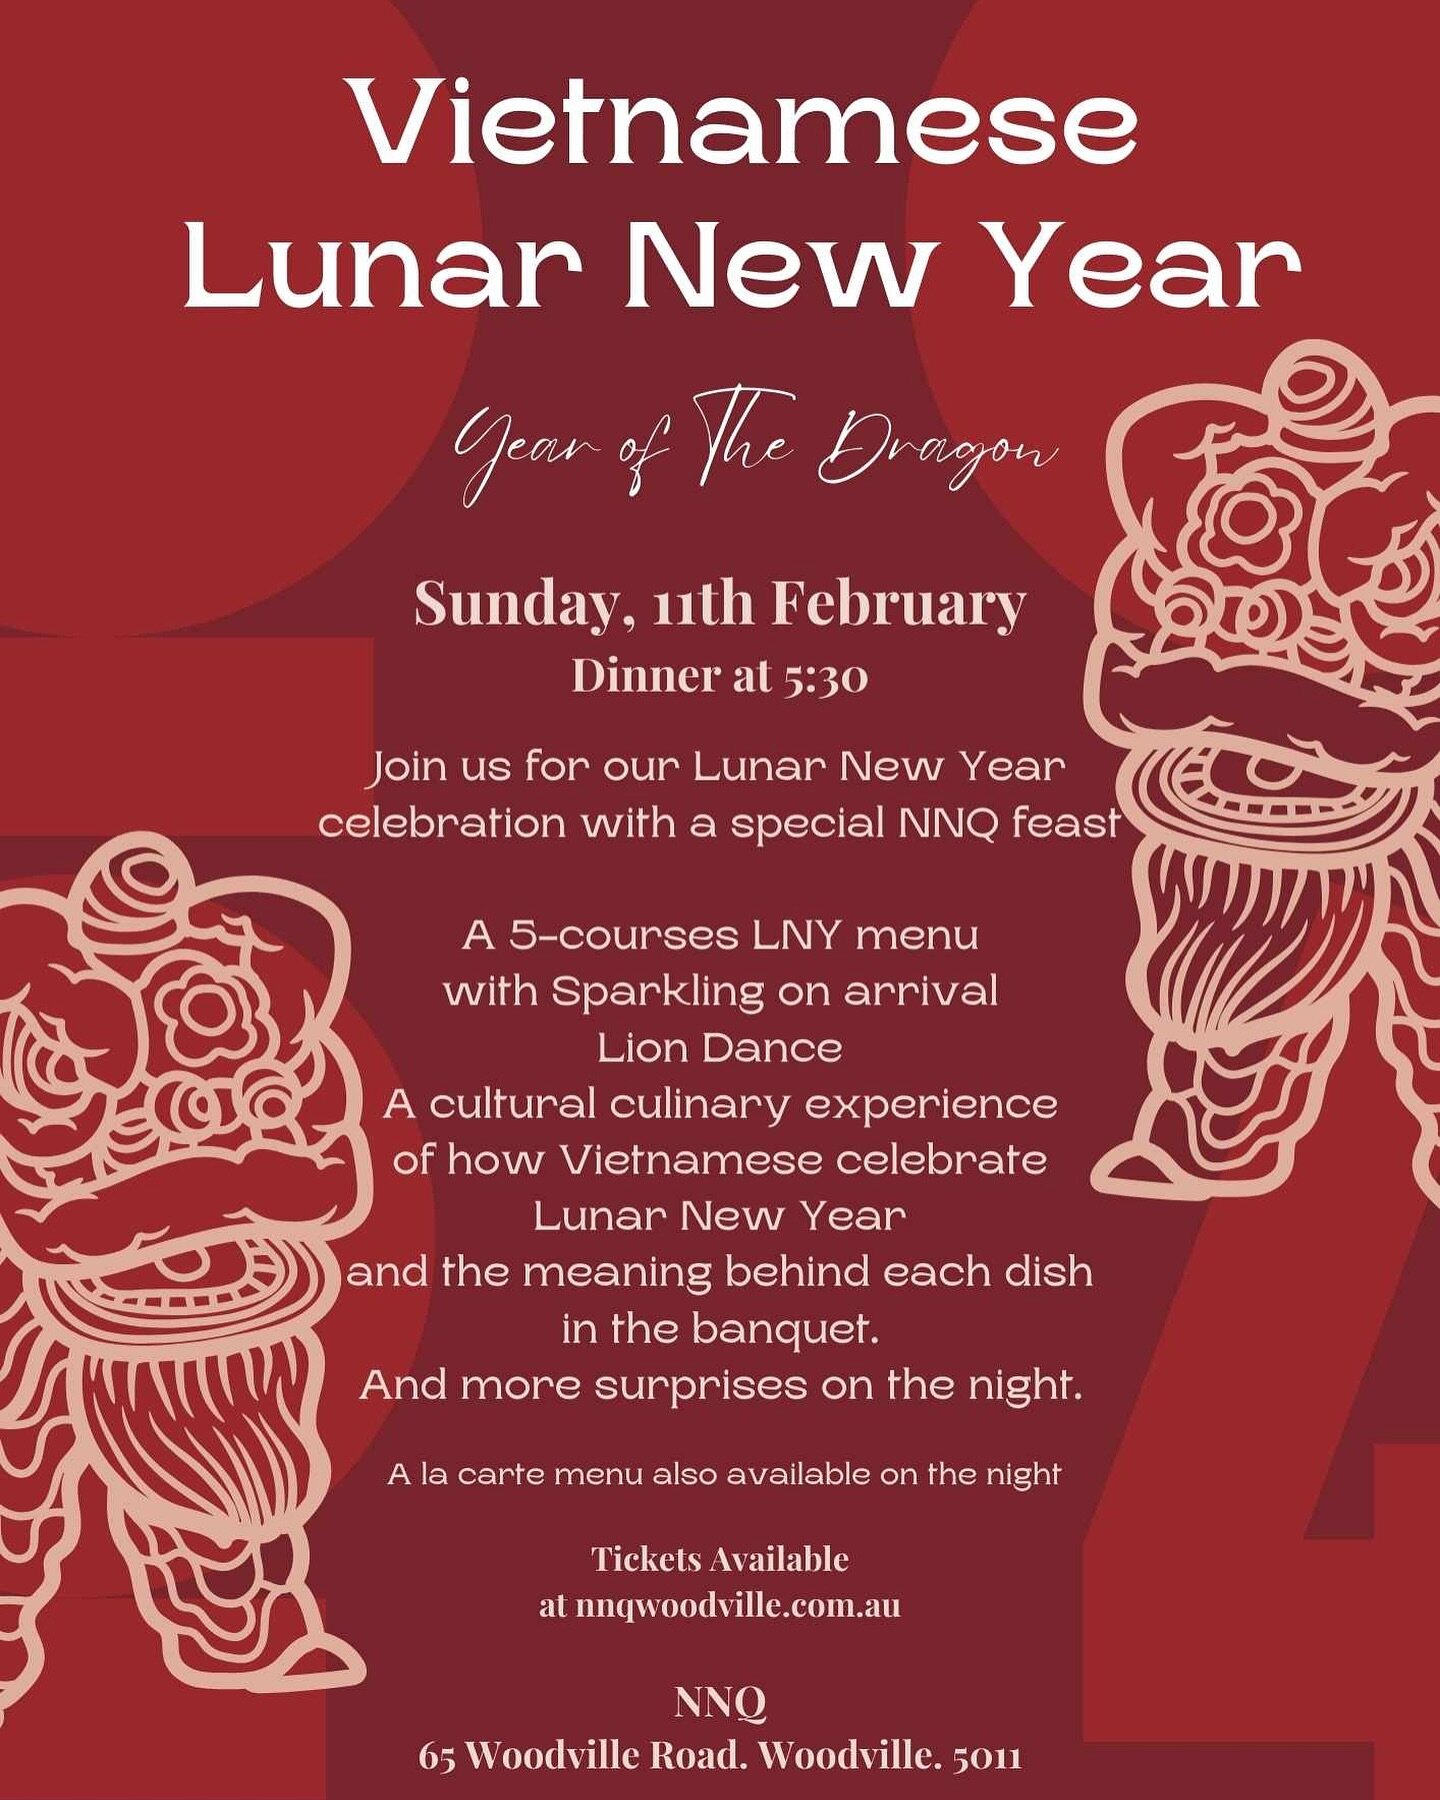 Only a week away!!! 
Join us to celebrate our Lunar New Year. Vietnamese dishes inspired by our Traditional New Year feast, lion dance and more surprises on the night. 

Booking available via nnqwoodville.com.au